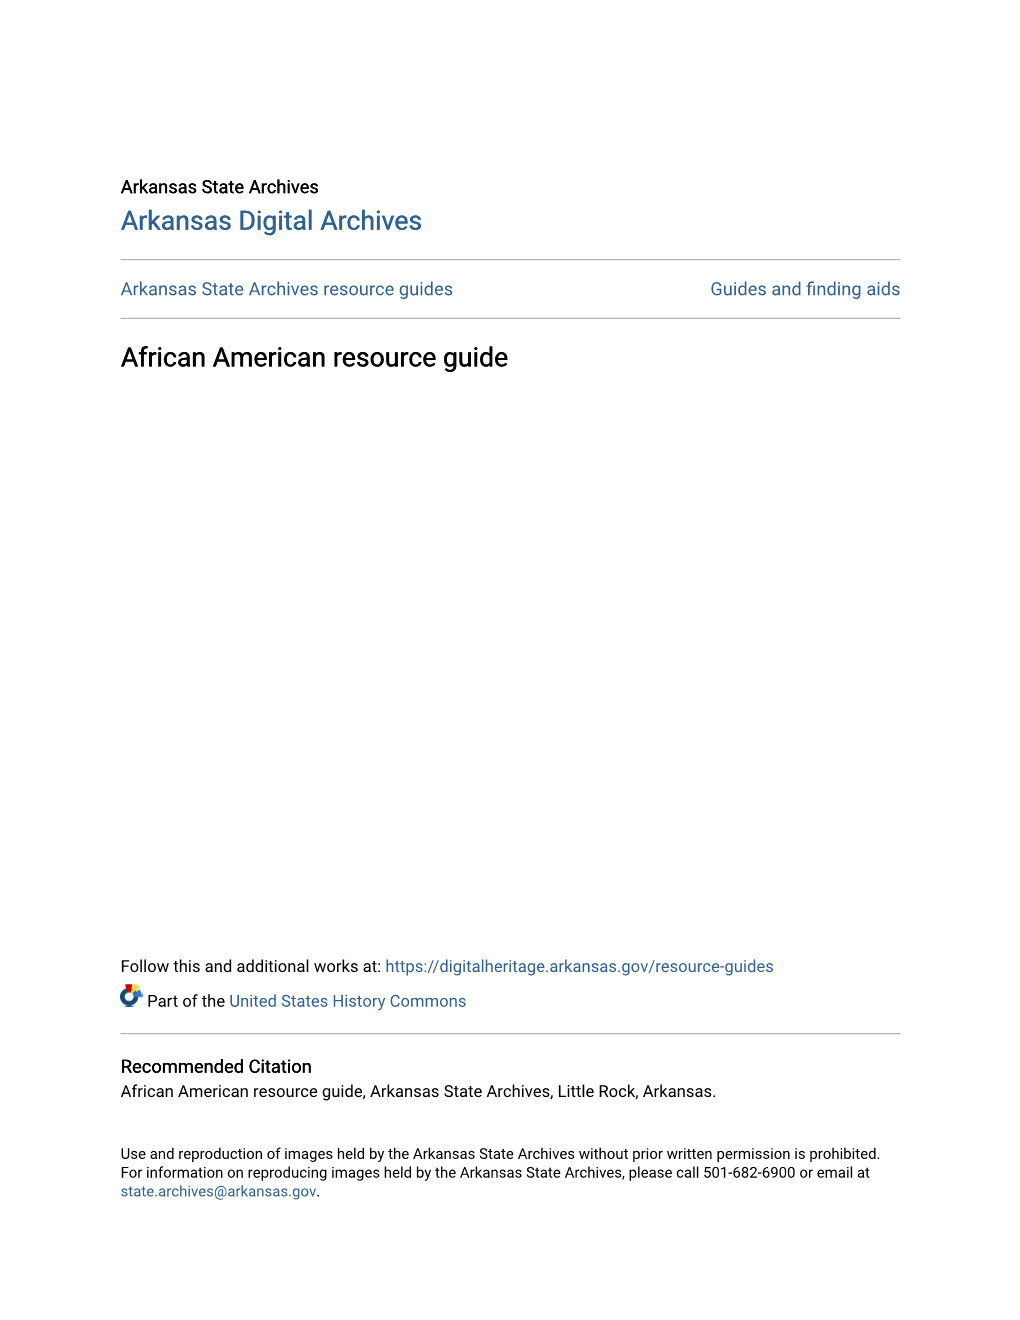 African American Resource Guide